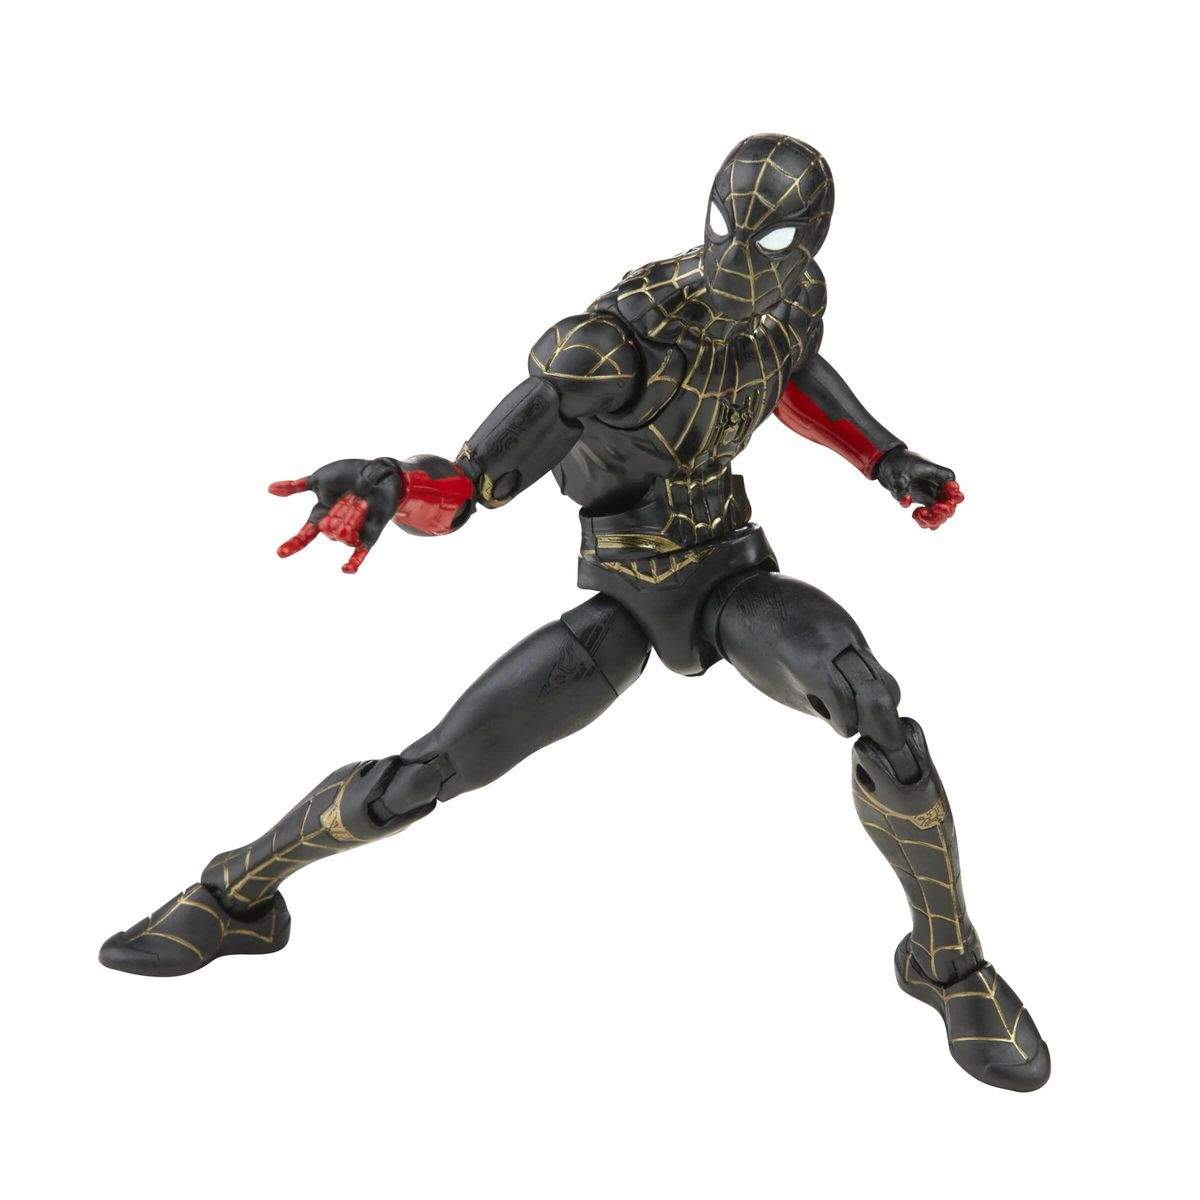 A posed action figure of Spider-Man in a black and gold suit from Spider-Man: No Way Home